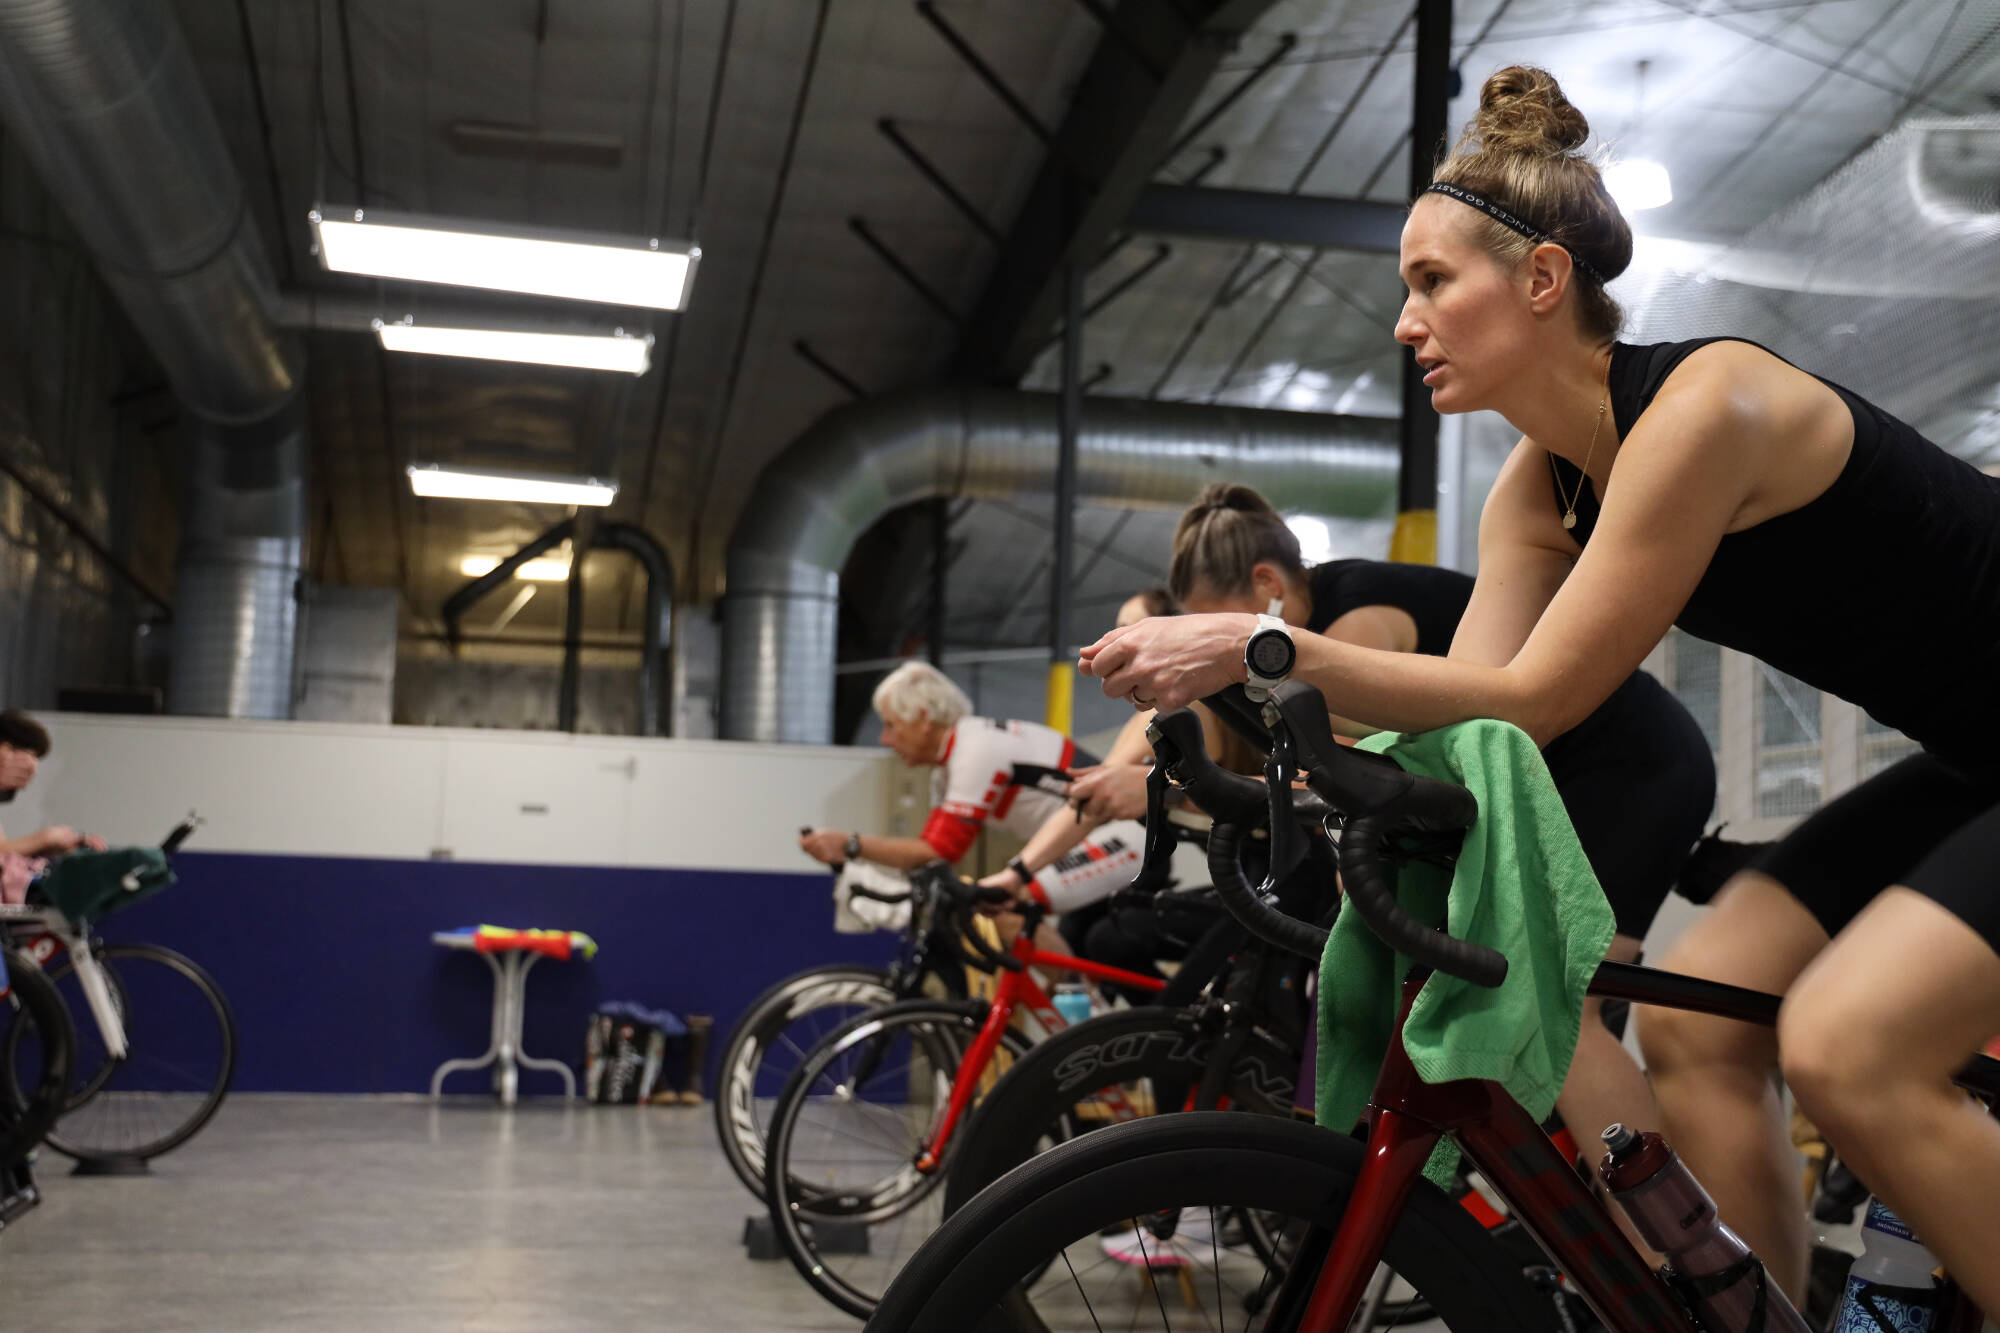 Clarise Larson / Juneau Empire
Jenna Weirsma pedals a stationary bike with other athletes during a High Cadence Triathlon Team workout at the Dimond Park Field House Thursday evening.